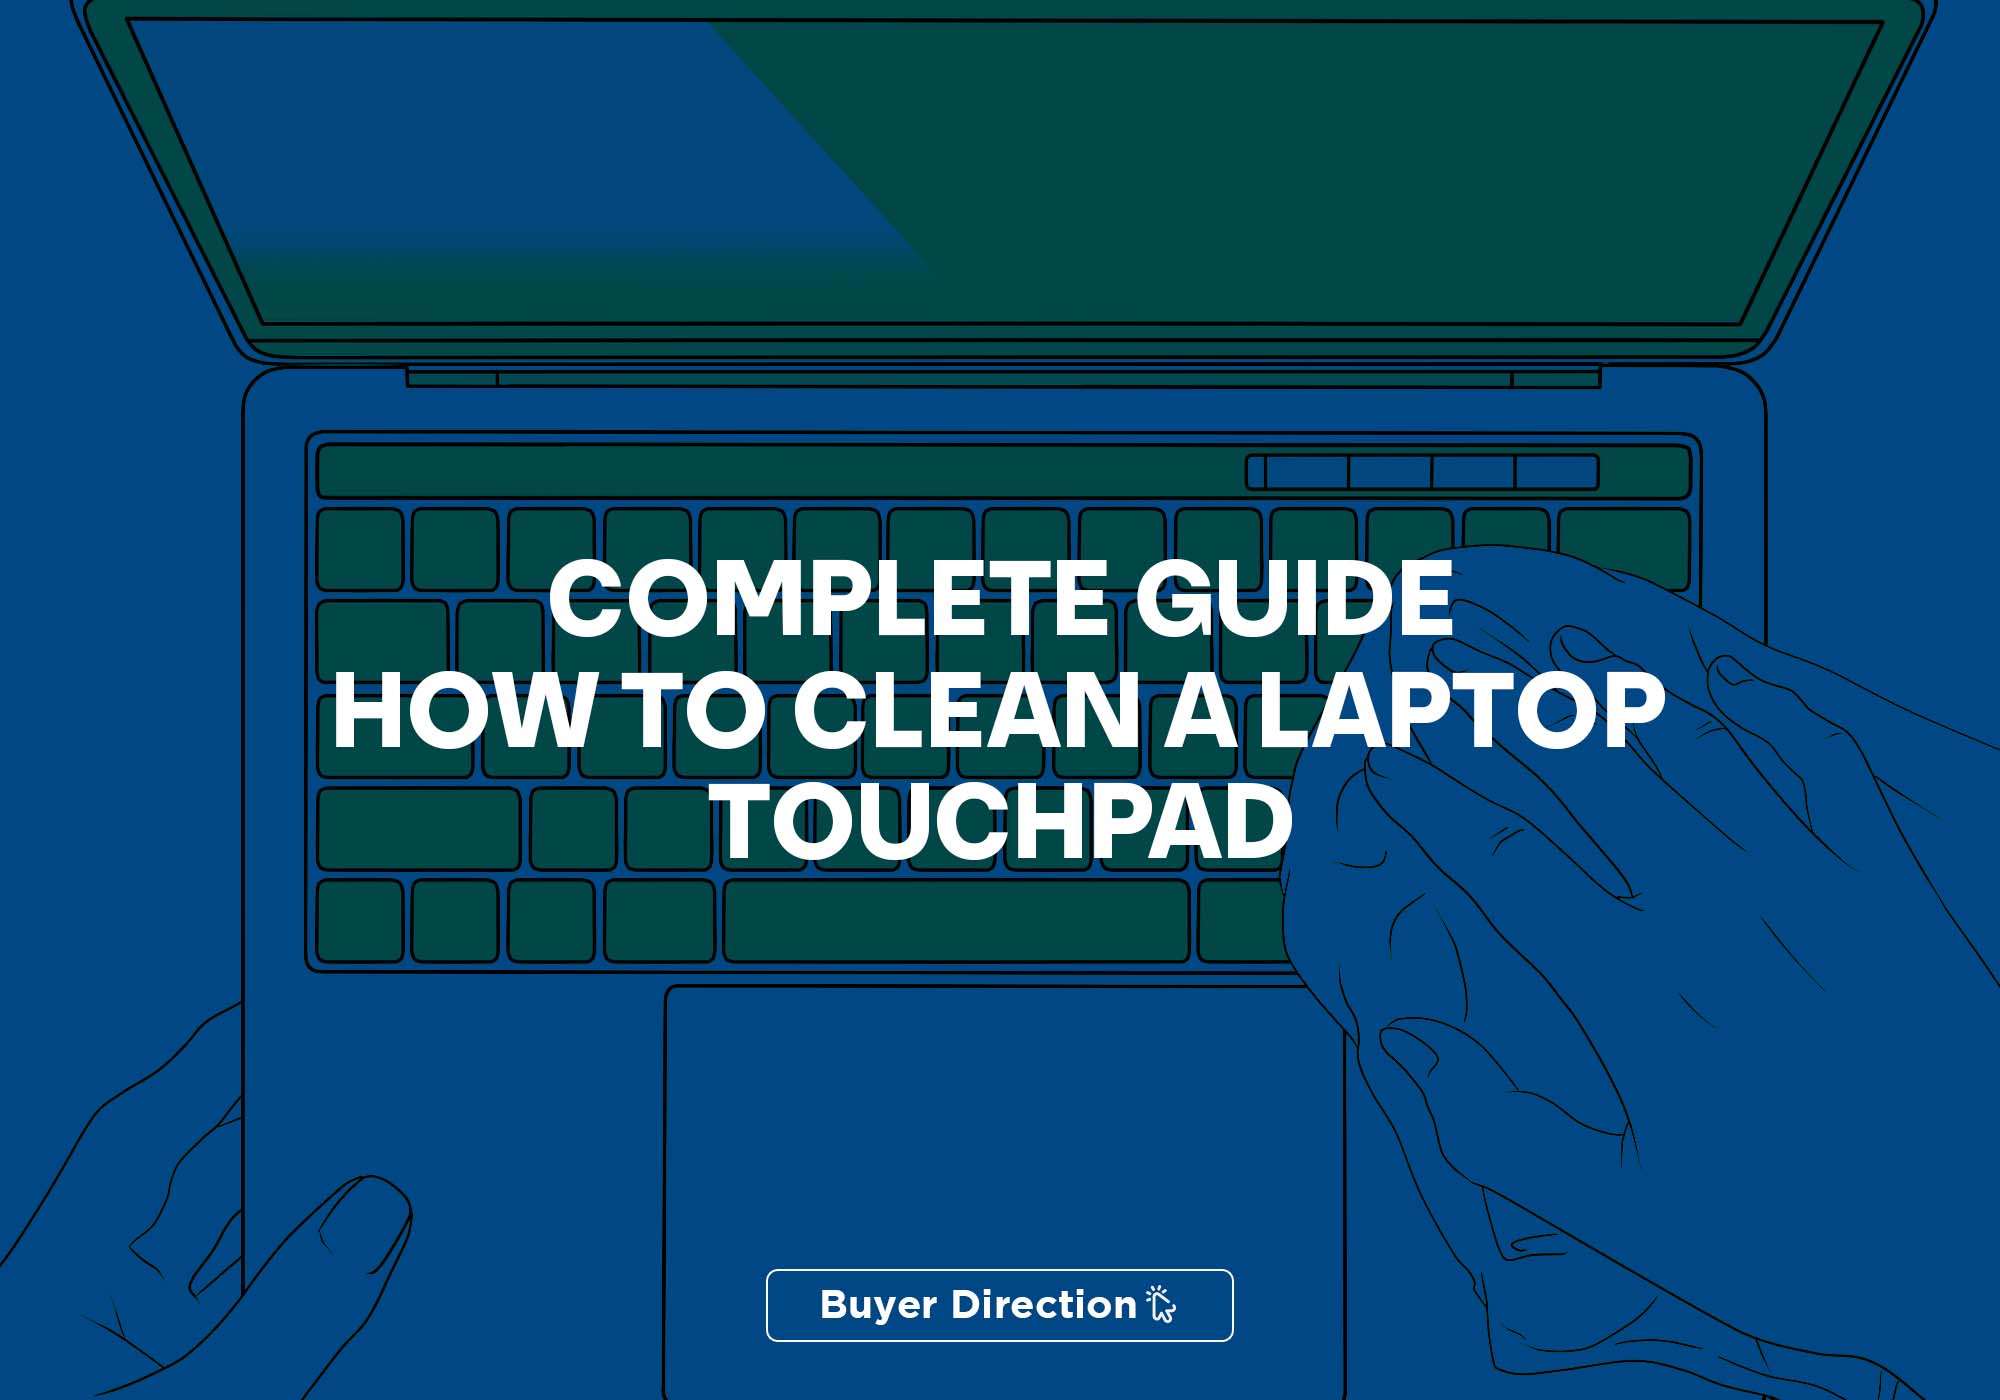 A Complete Guide Of How To Clean A Laptop Touchpad